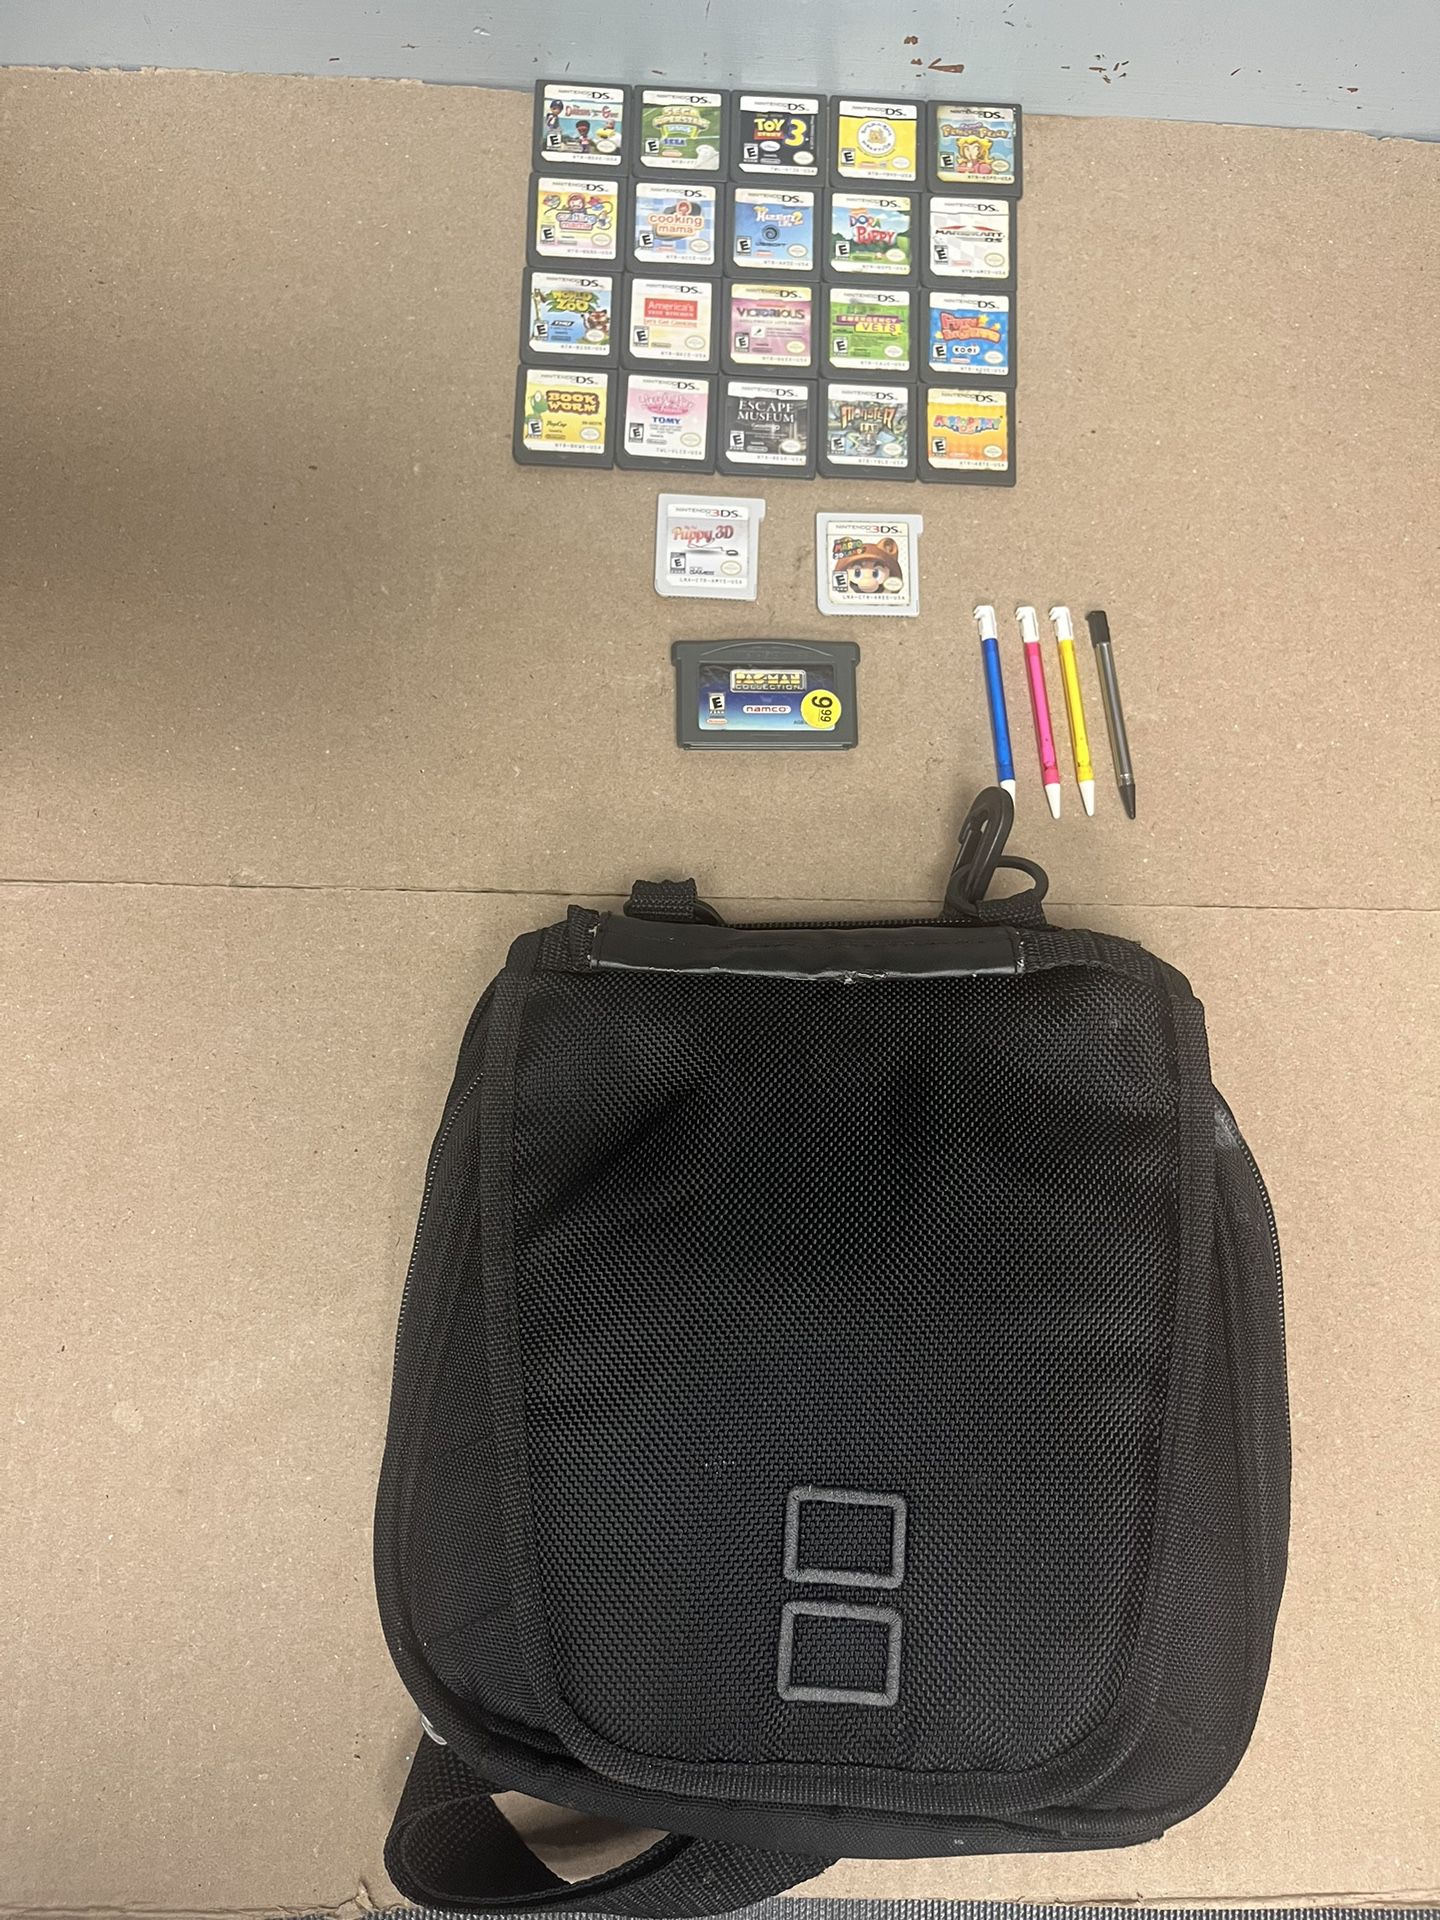 Nintendo Ds Bundle With Bag And Stylus 